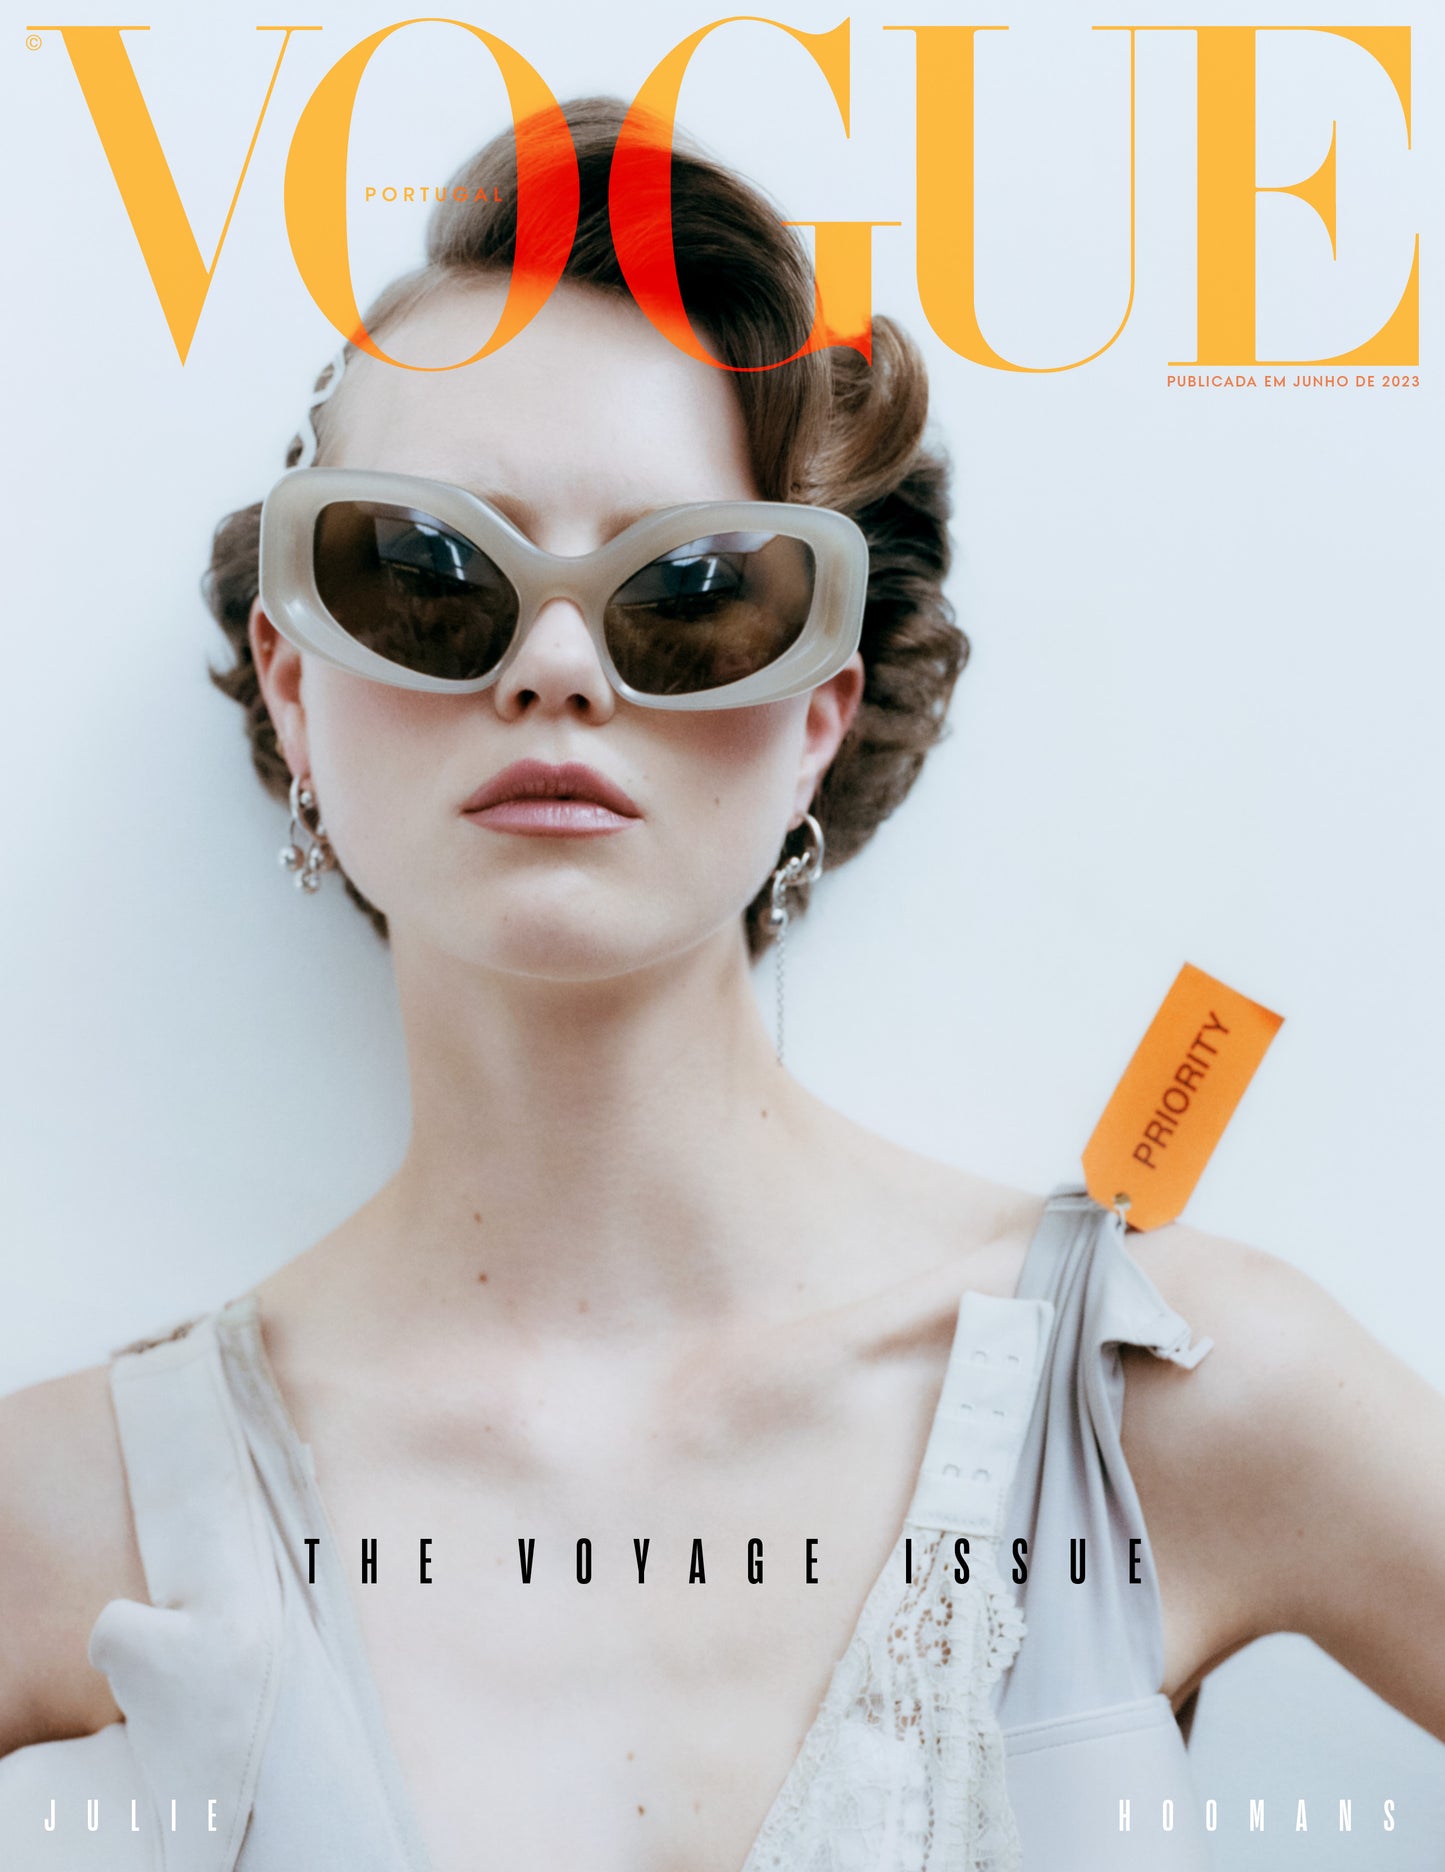 The Voyage Issue - Cover 2